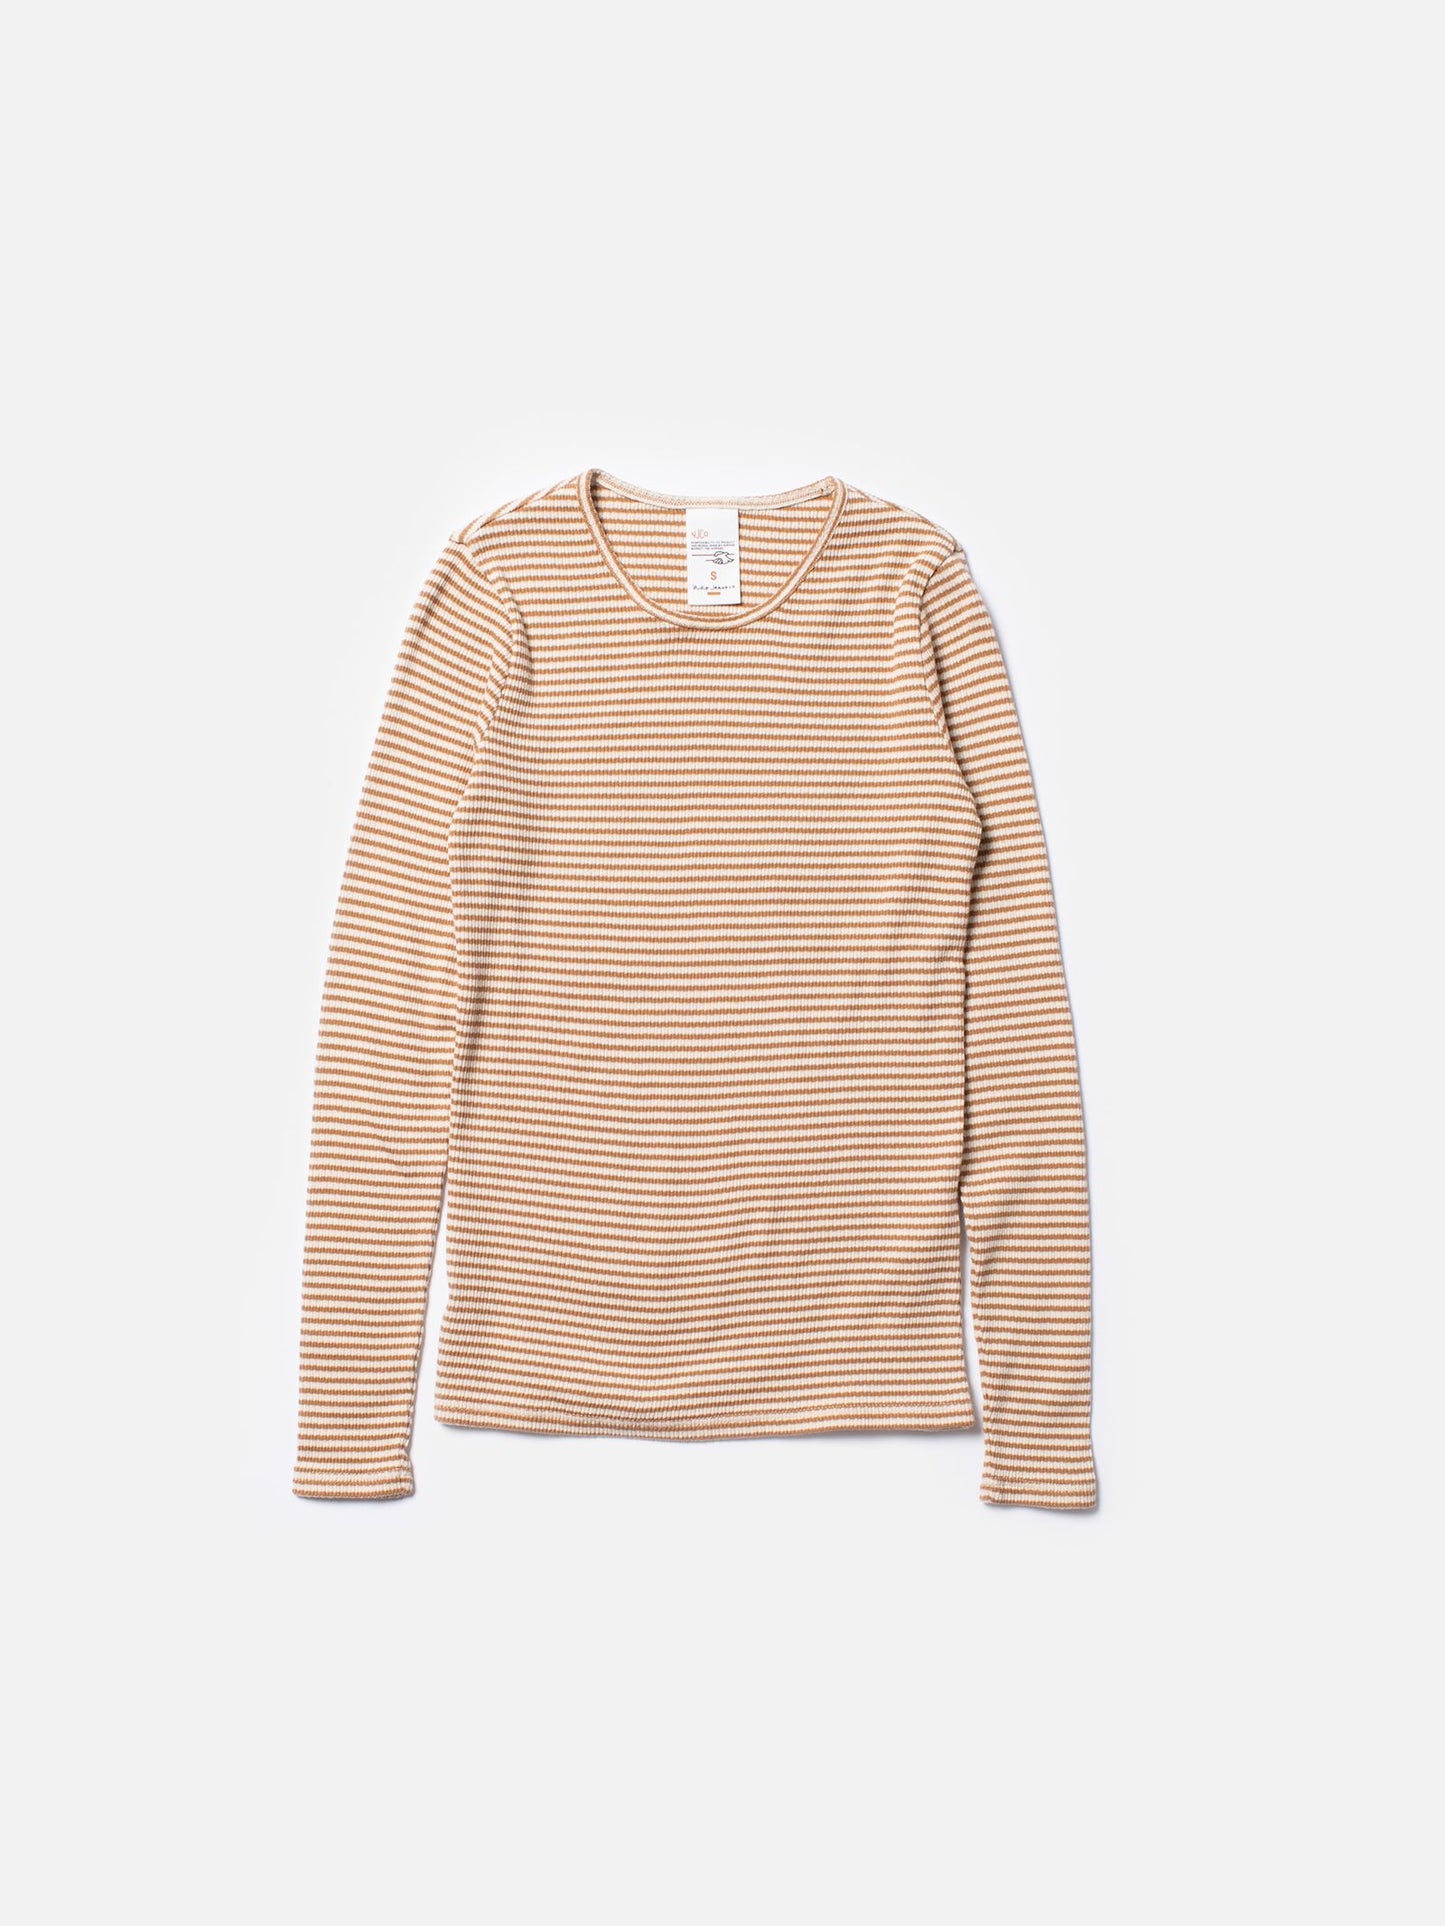 Nudie Jeans Jessy Striped Rib LS T-Shirt in Brown and Off White